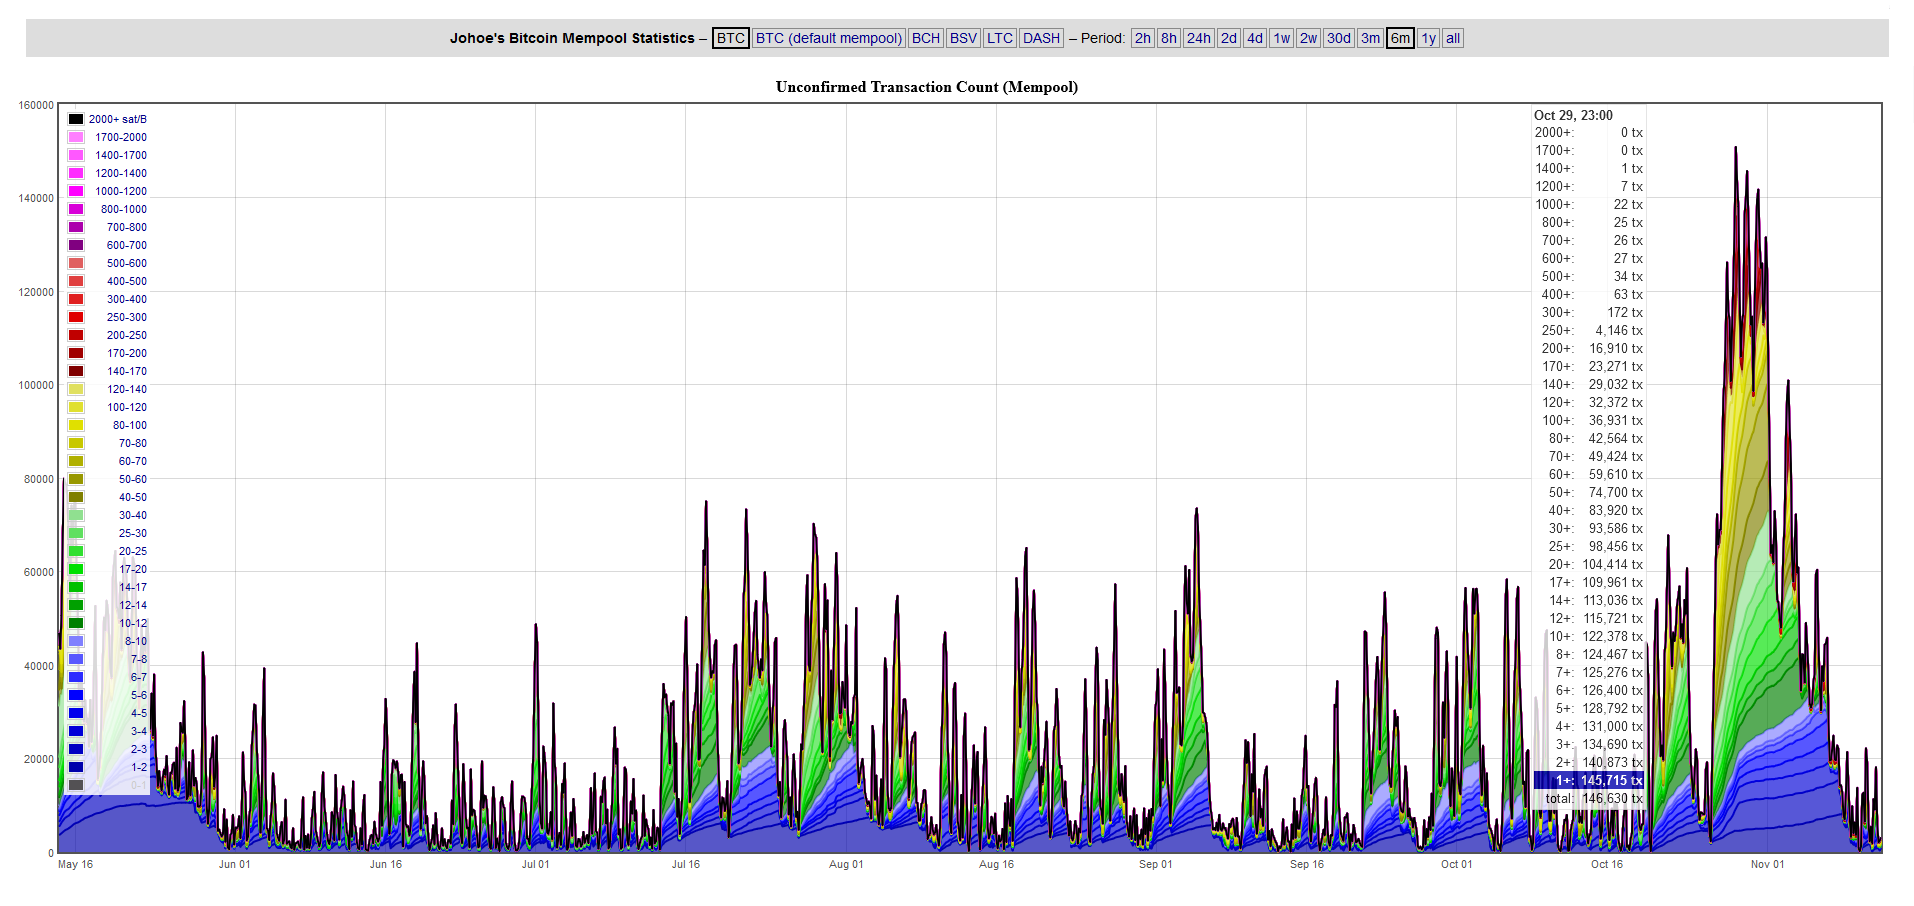 Bitcoin's Mempool Congestion: Unconfirmed Transactions Approach , in September